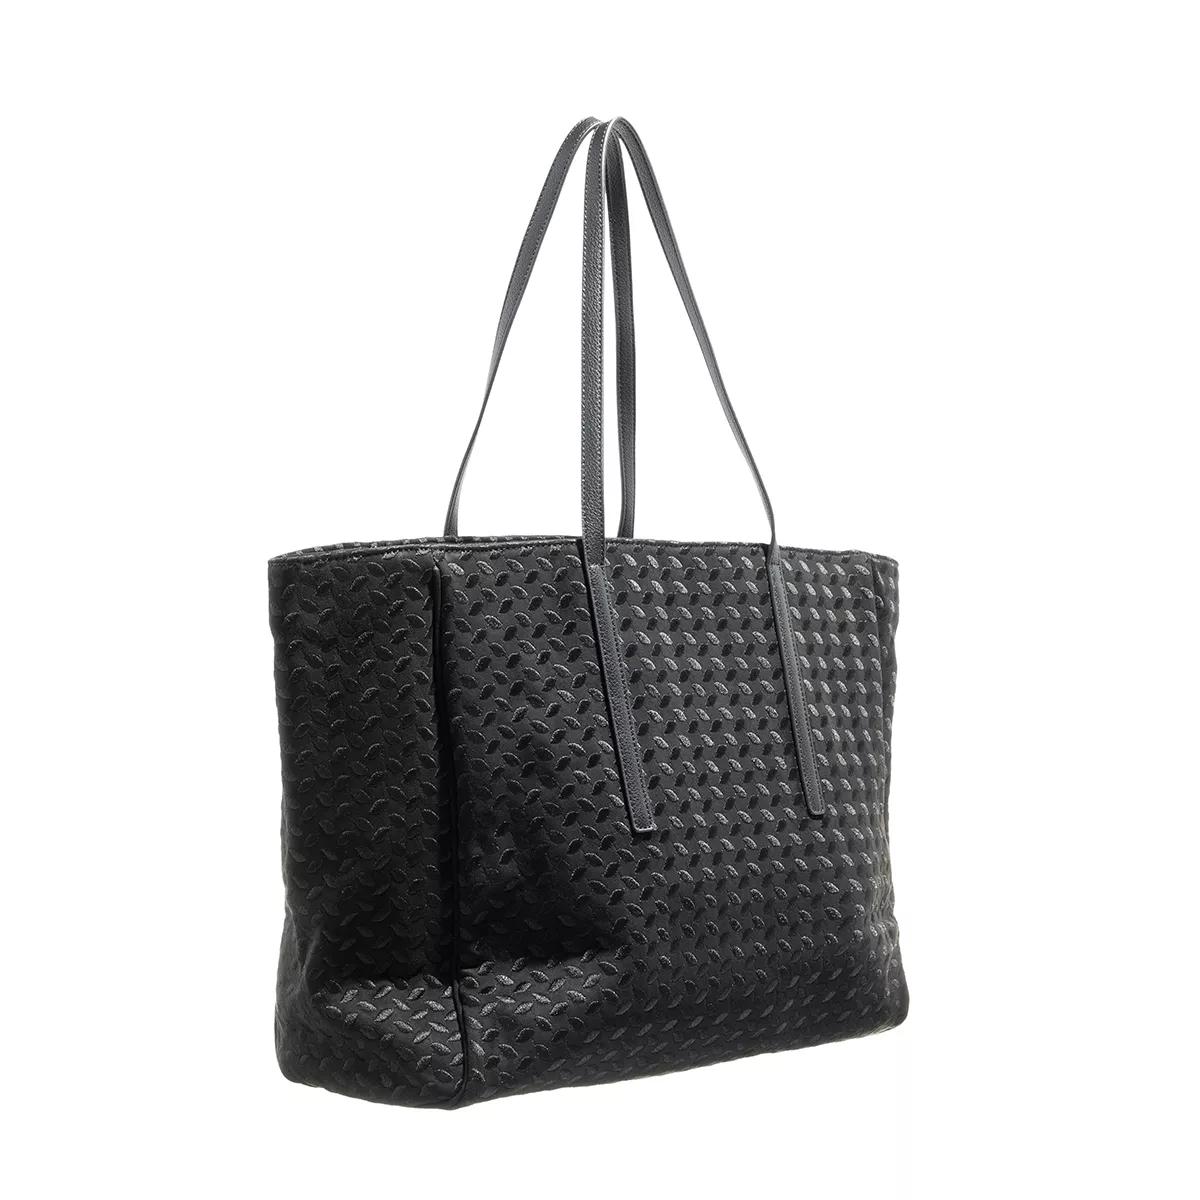 Lala Berlin Totes East West Tote Moira in zwart